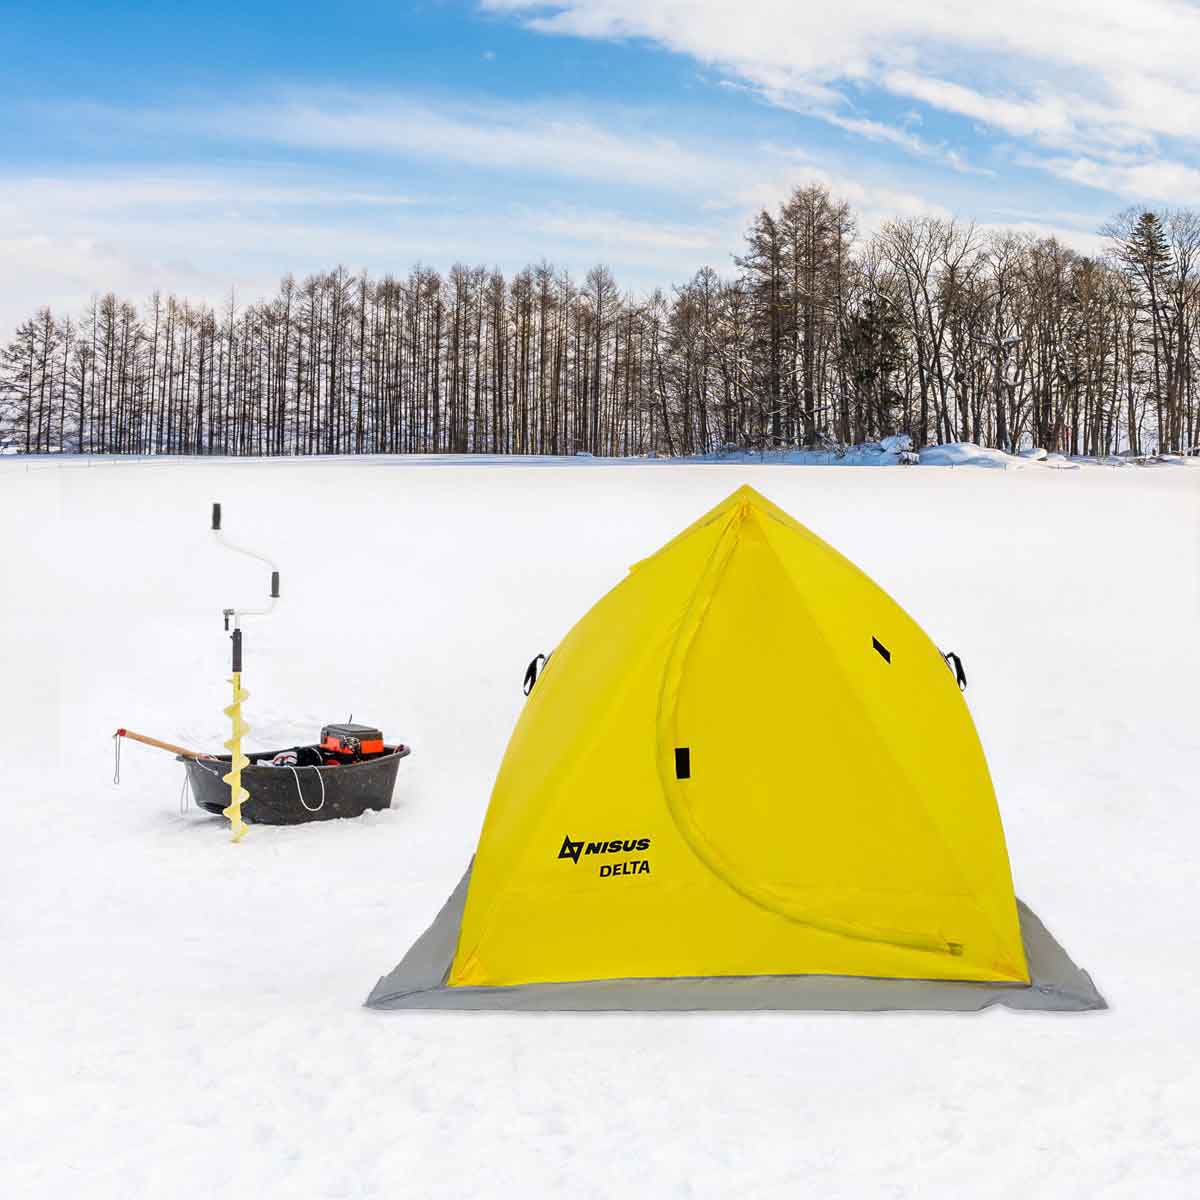 Delta Portable Ice Fishing Tent Shelter for 2 Persons, yellow color, on ice together with Iceberg Siberia hand auger, and an ice sled